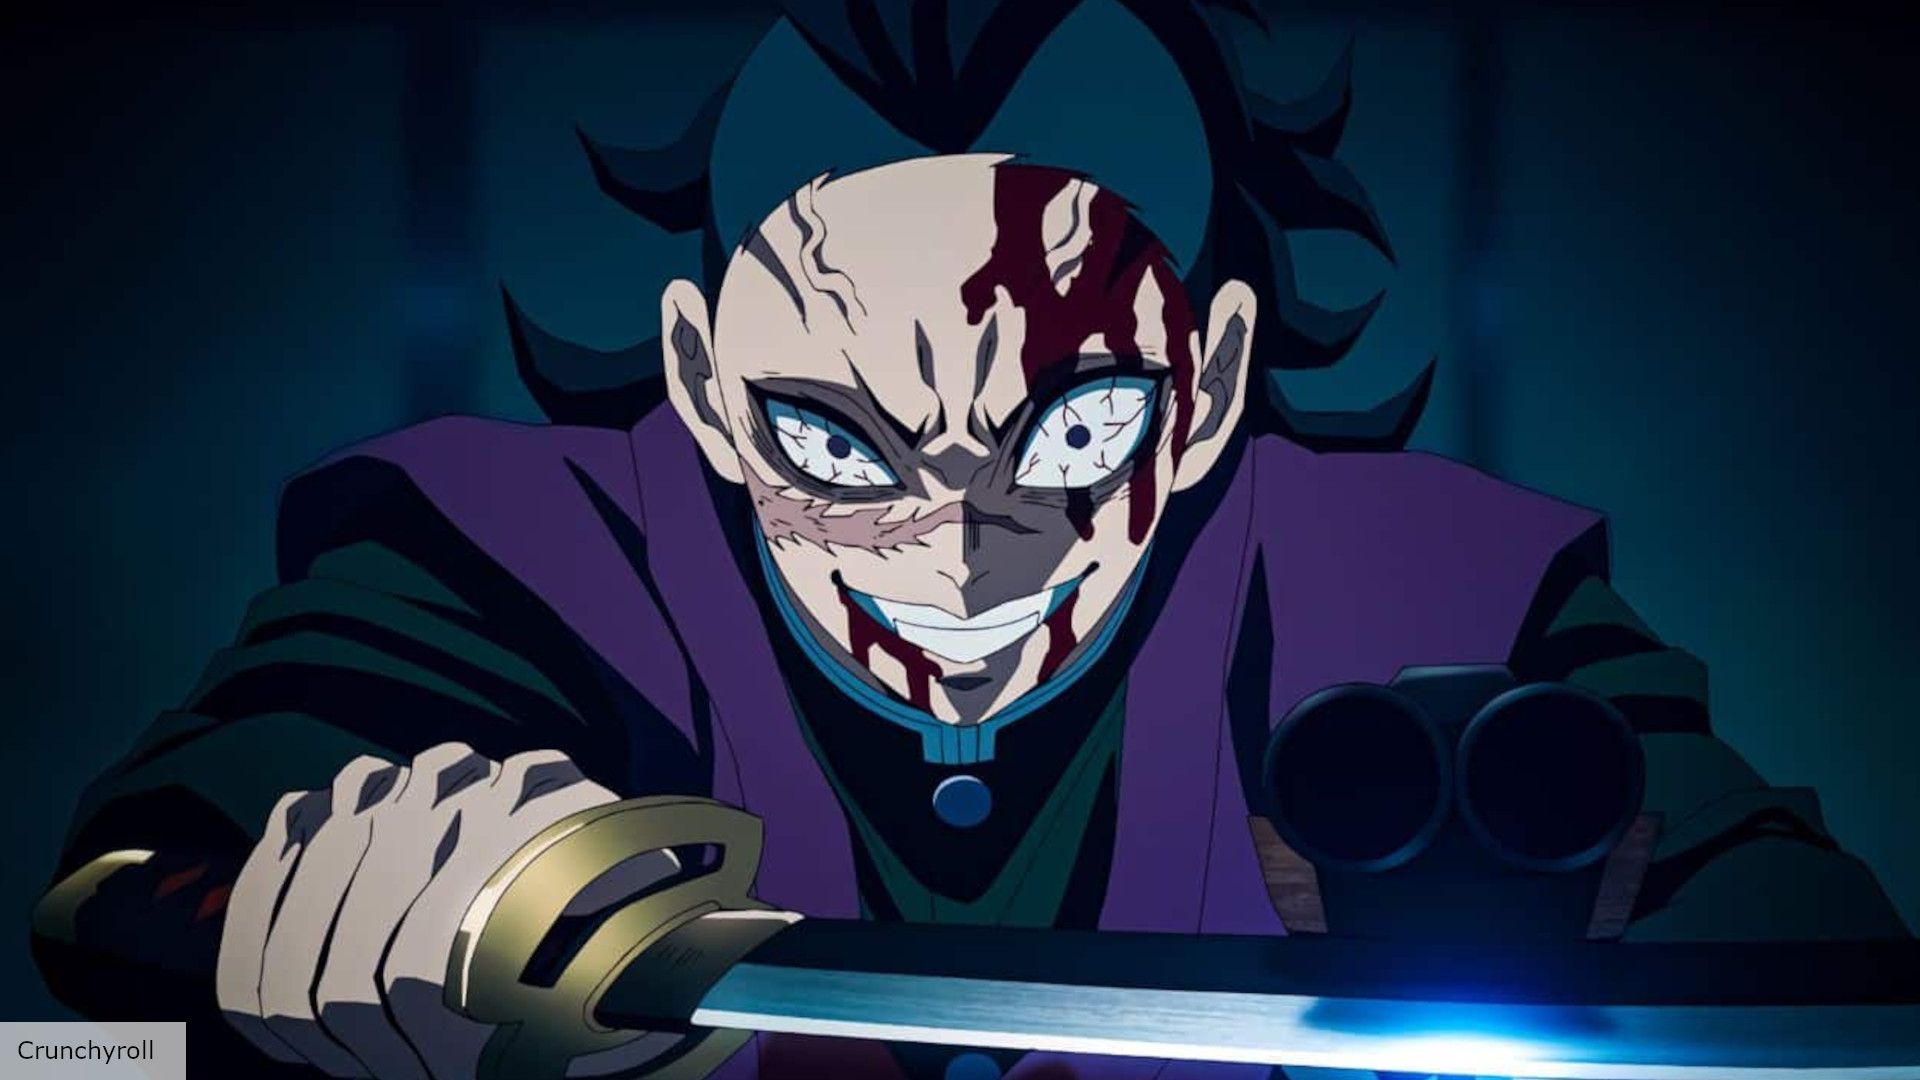 Demon Slayer Season 3 Episode 11: Demon Slayer Season 3 Episode 11: Check  release date and other details of the 70-minute finale episode - The  Economic Times